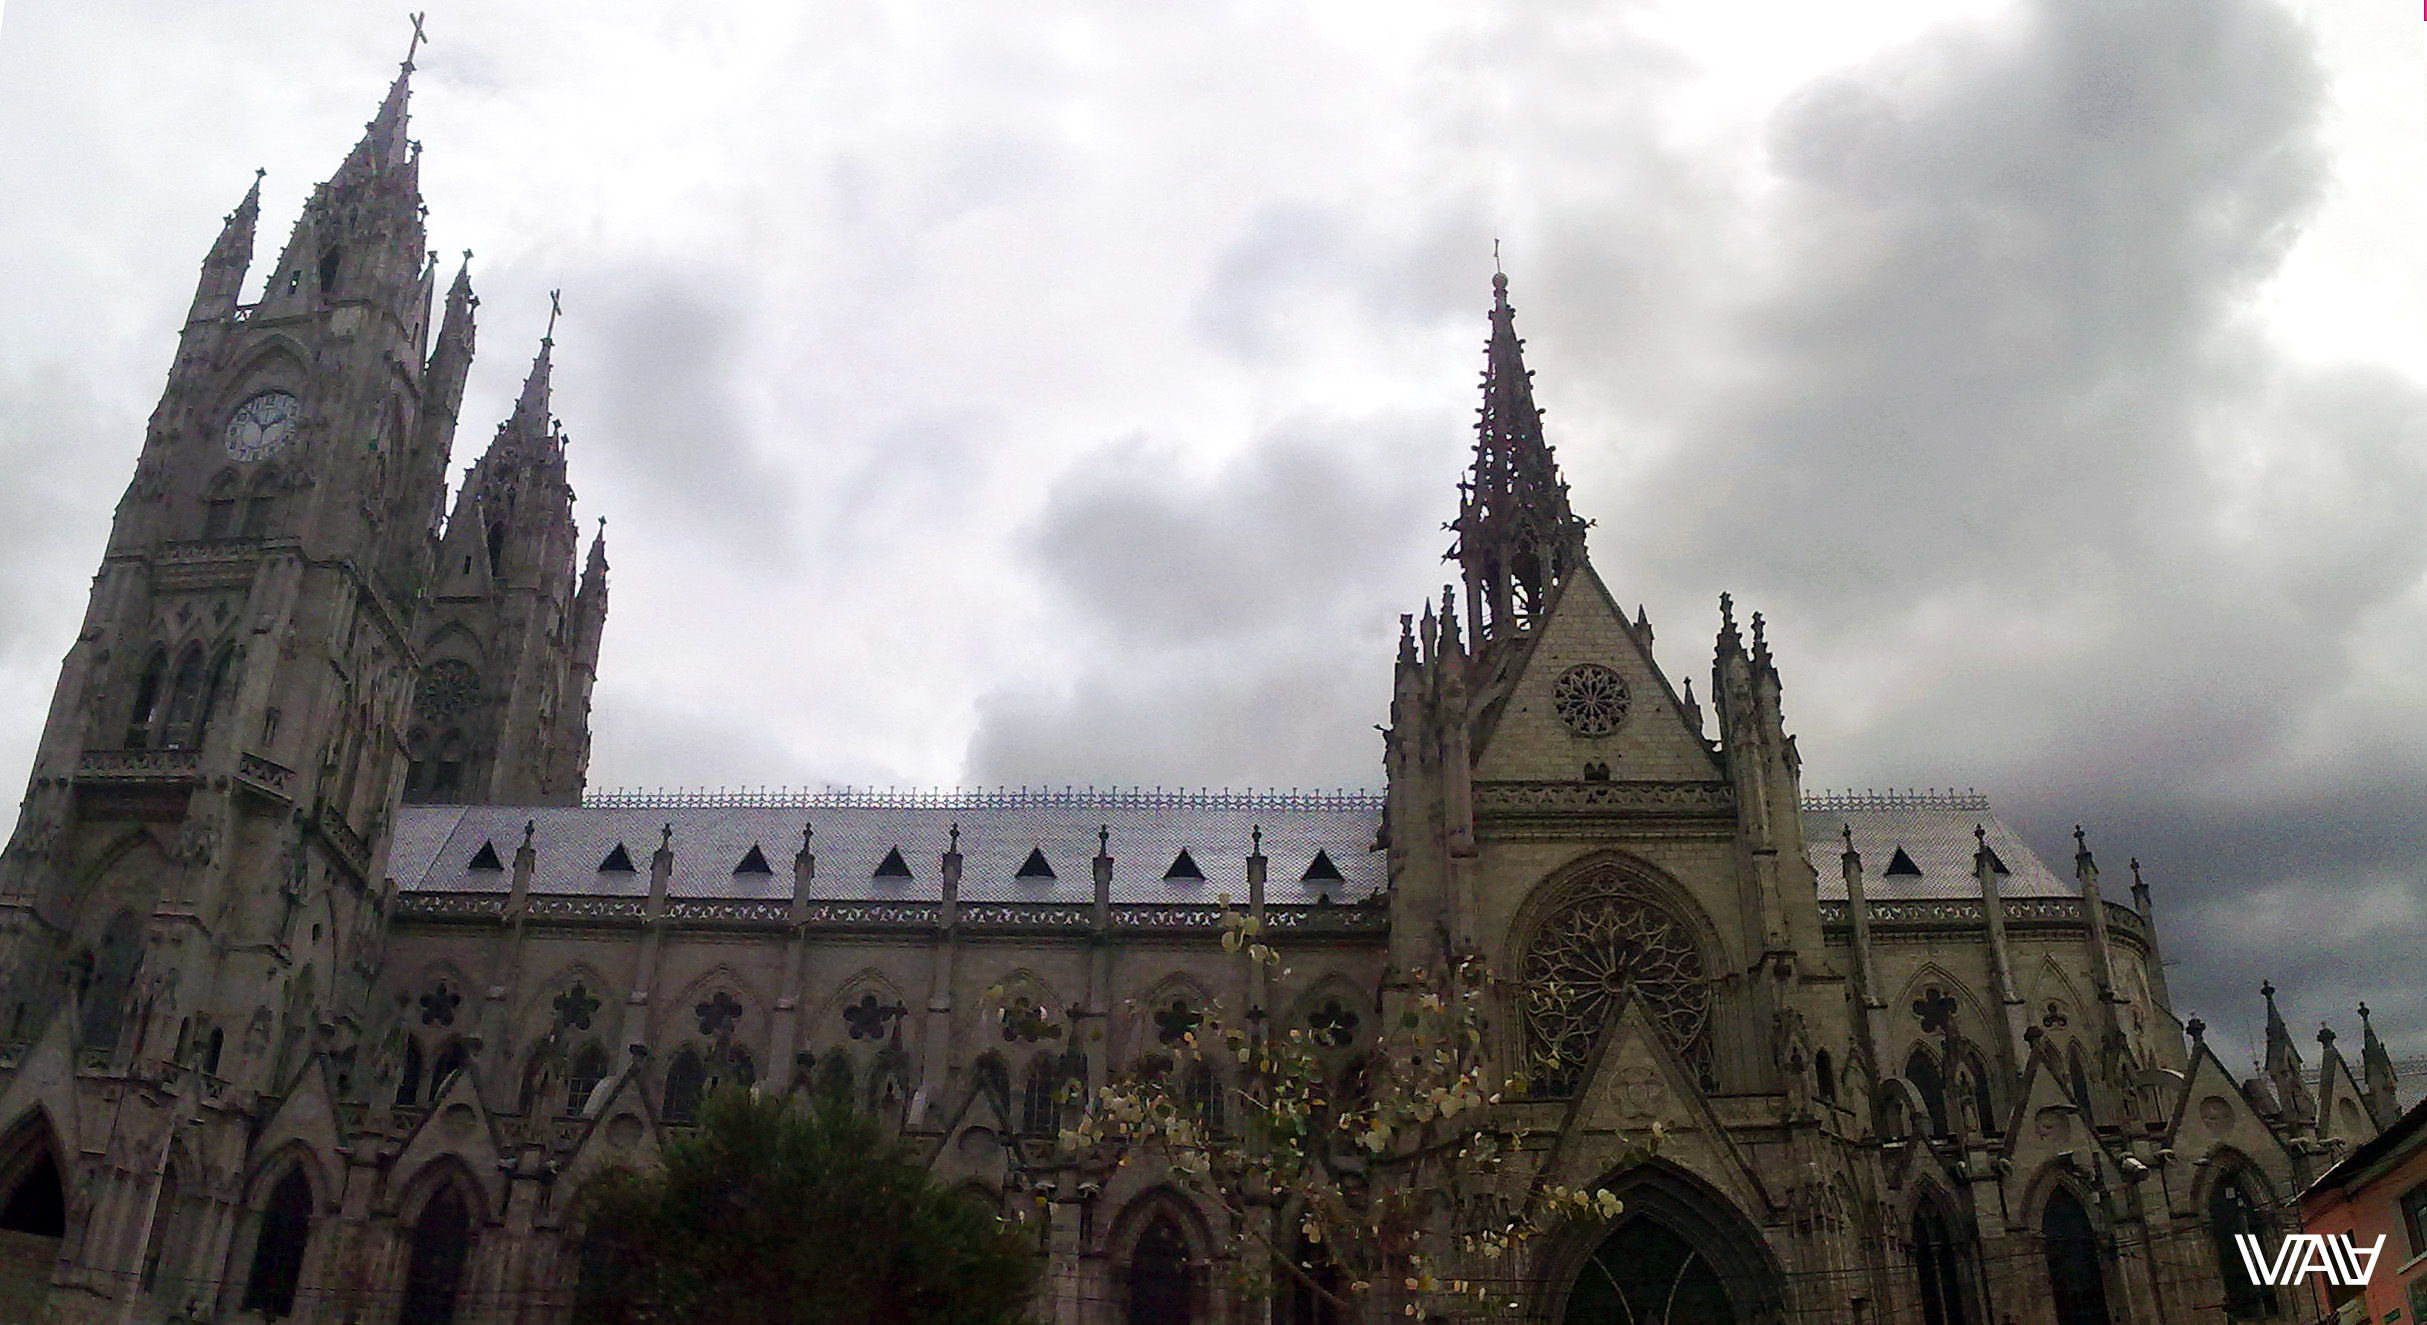 When I was making this panoramic photo near me Russian couple were arguing. I wanted to say hi so hard, but didn't want to enter their dispute. It's a pity. Basílica del Voto Nacional, Quito, Ecuador